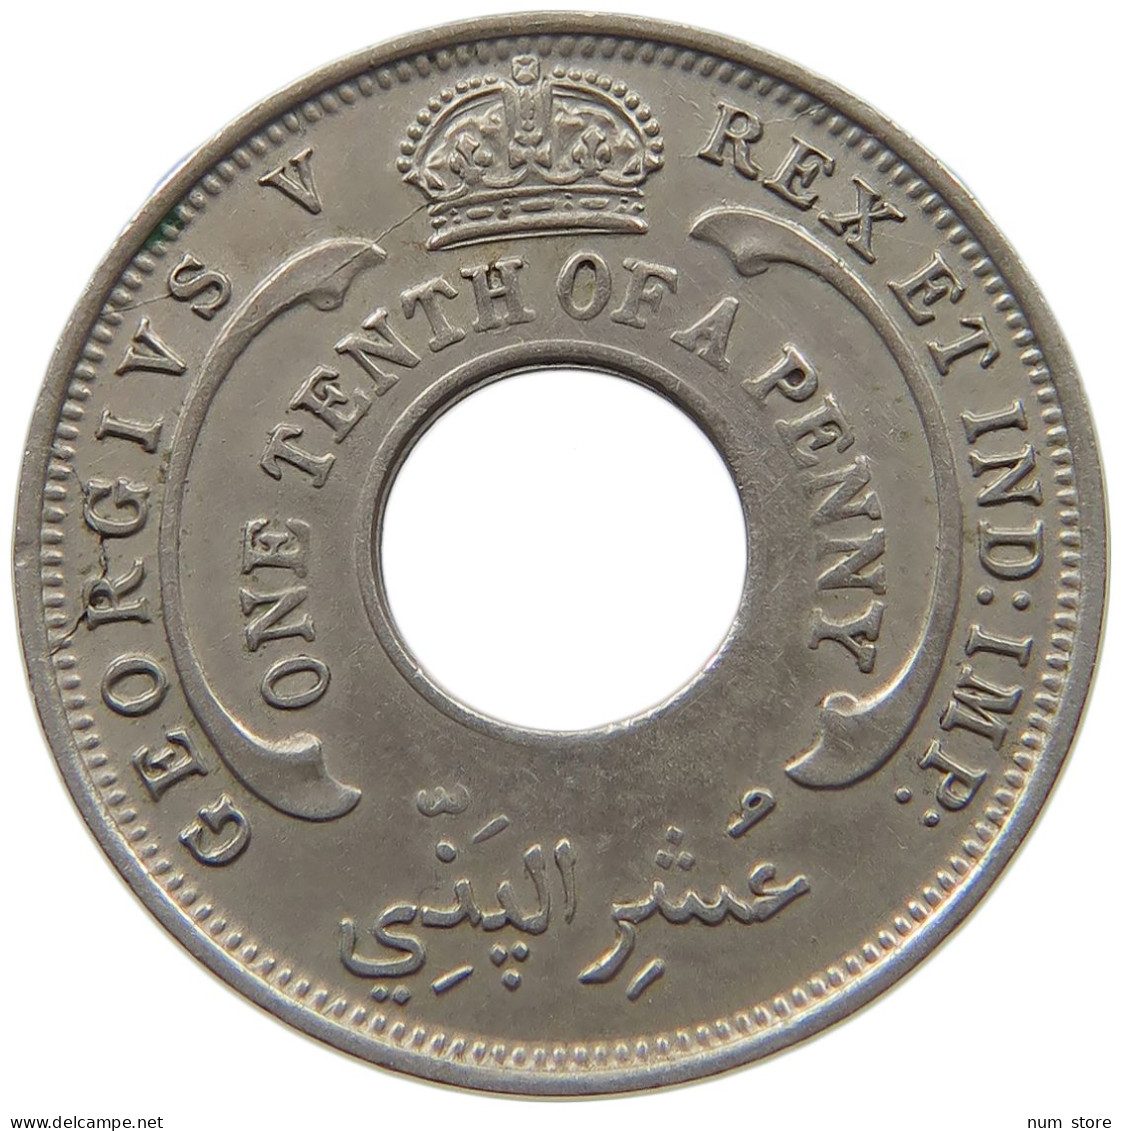 WEST AFRICA 1/10 PENNY 1927 George V. (1910-1936) #t001 0253 - Colecciones